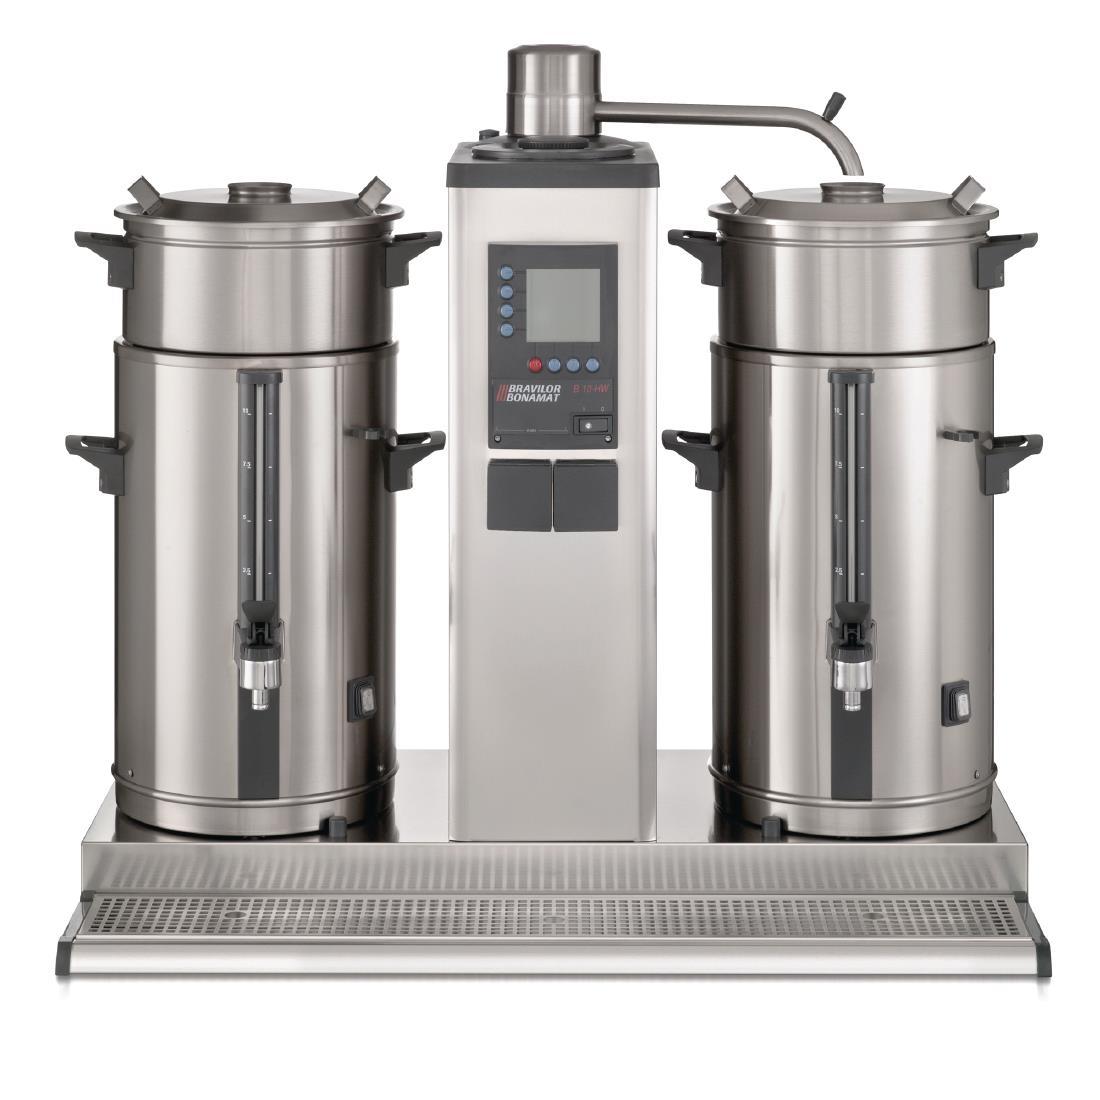 Bravilor B20 Bulk Coffee Brewer with 2x20Ltr Coffee Urns 3 Phase - DC681  - 2